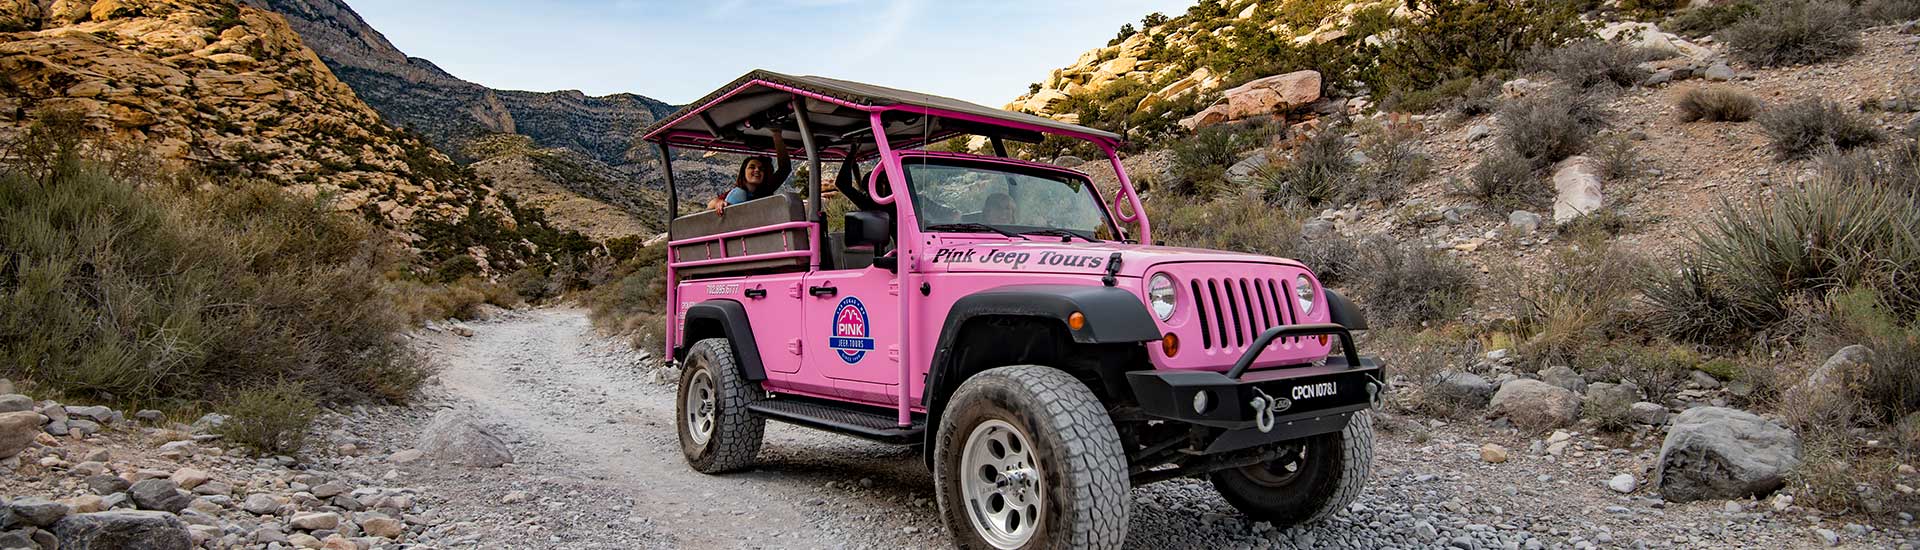 pink jeep tour red rock canyon